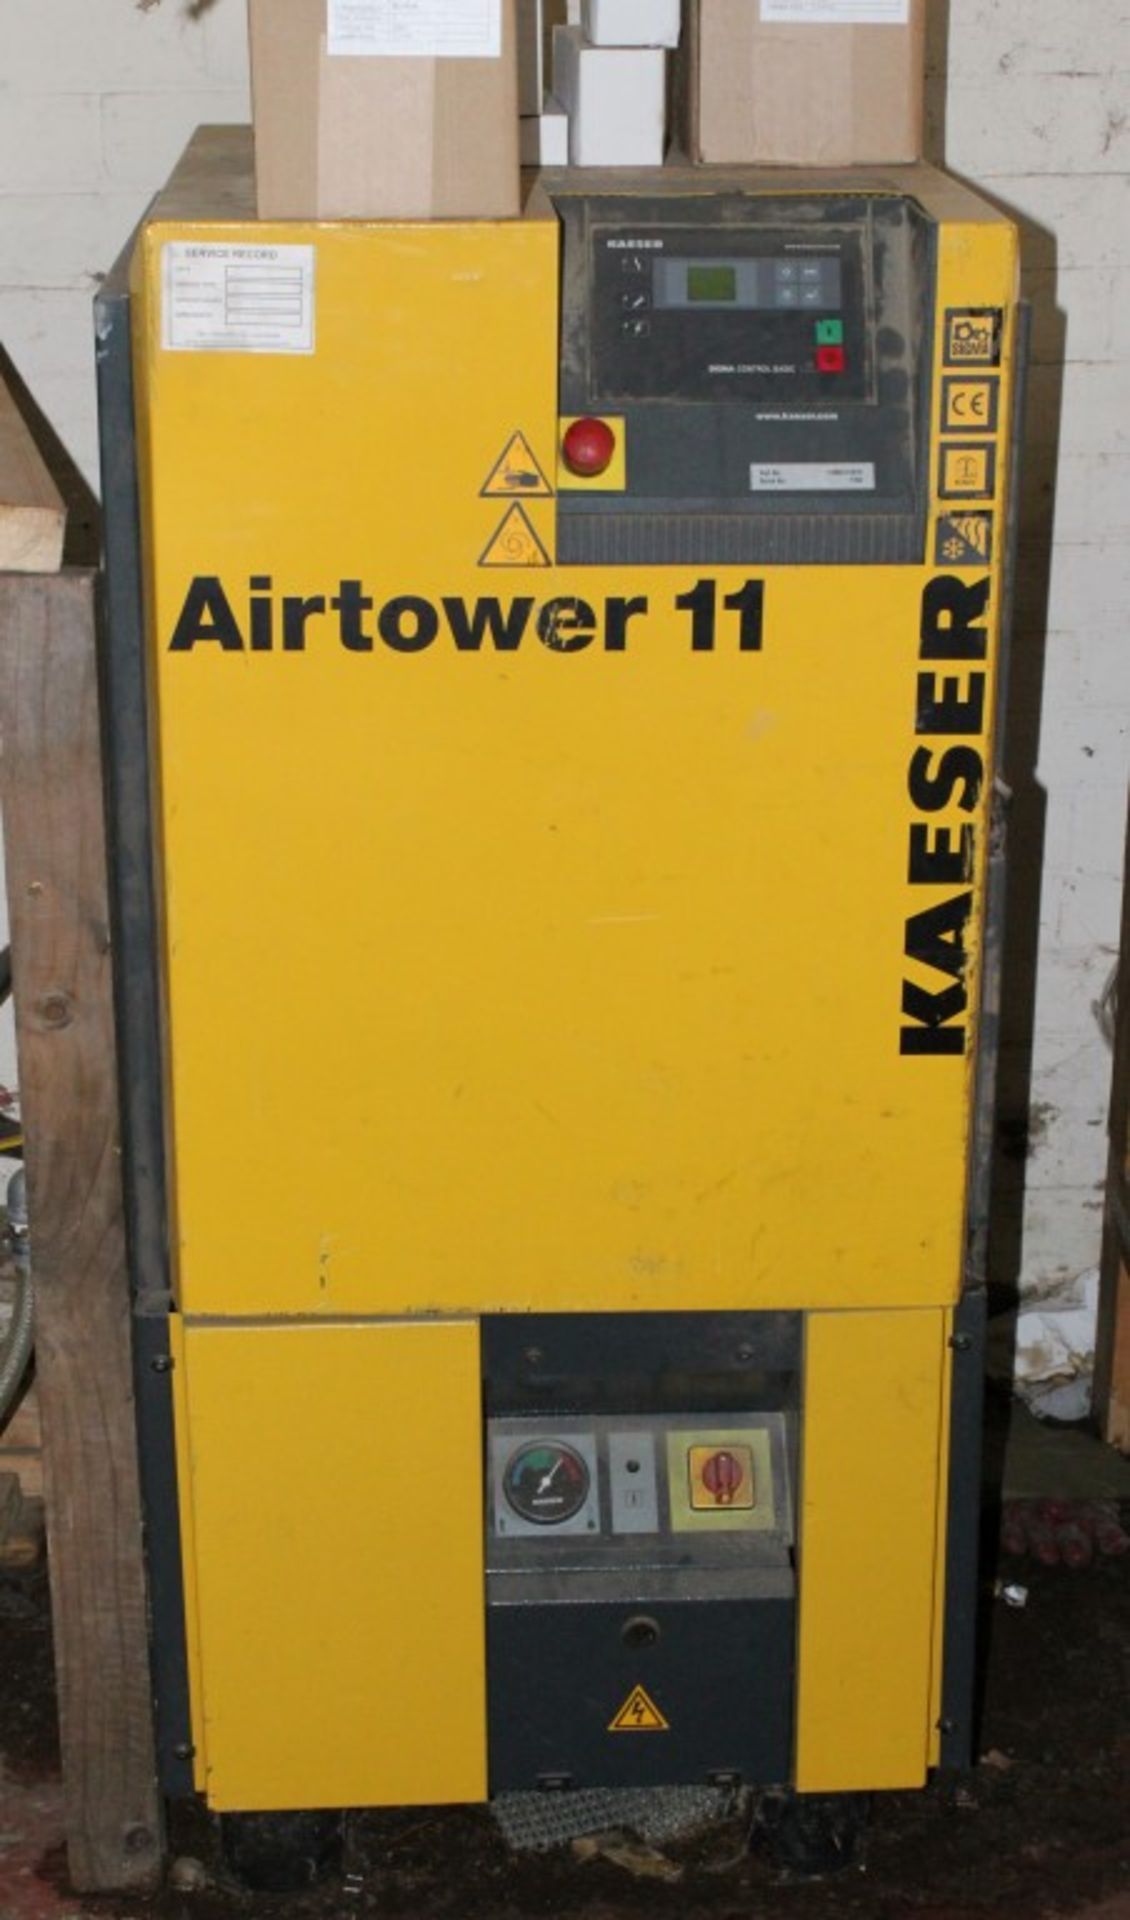 1 x Kaeser Airtower 11 Air Drying Screw Compressor - 3 Phase Power - Ref R025 - CL151 - Location: